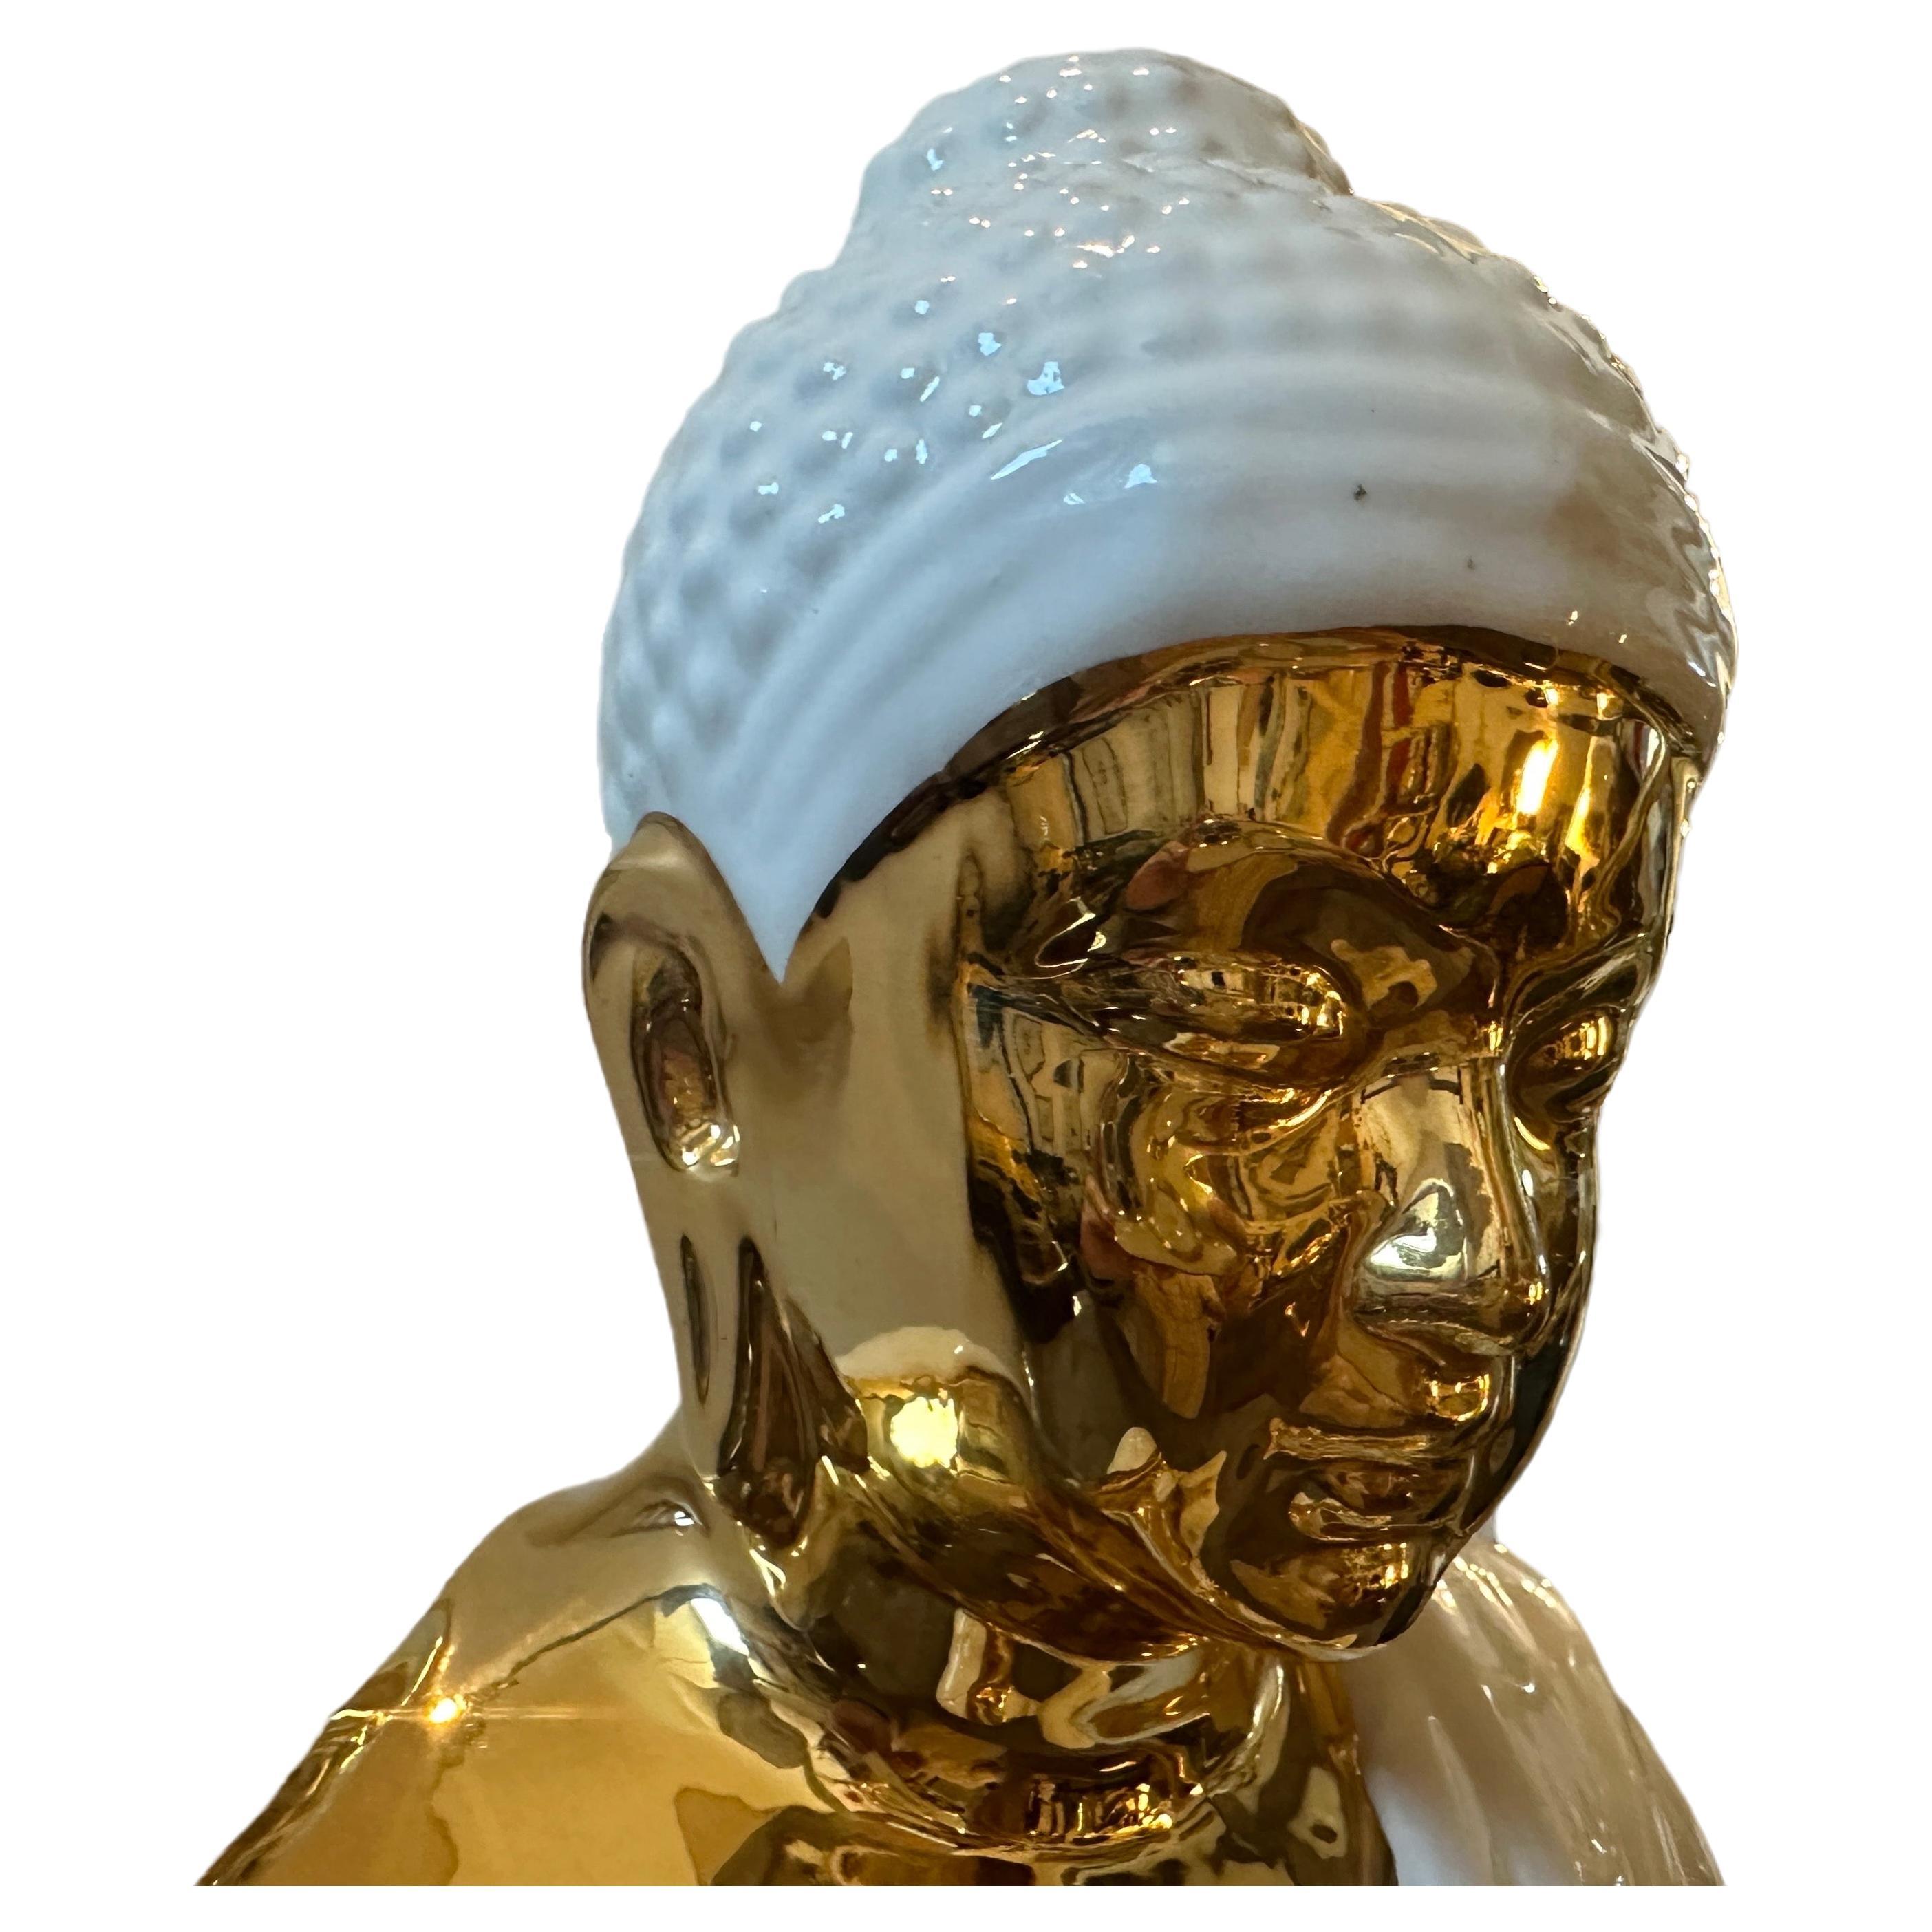 This 1980s Buddha Statue by Tommaso Barbi combines elements of traditional spirituality with the clean lines and simplicity of Barbi design. It serves not only as a decorative piece but also as a representation of inner peace and enlightenment,